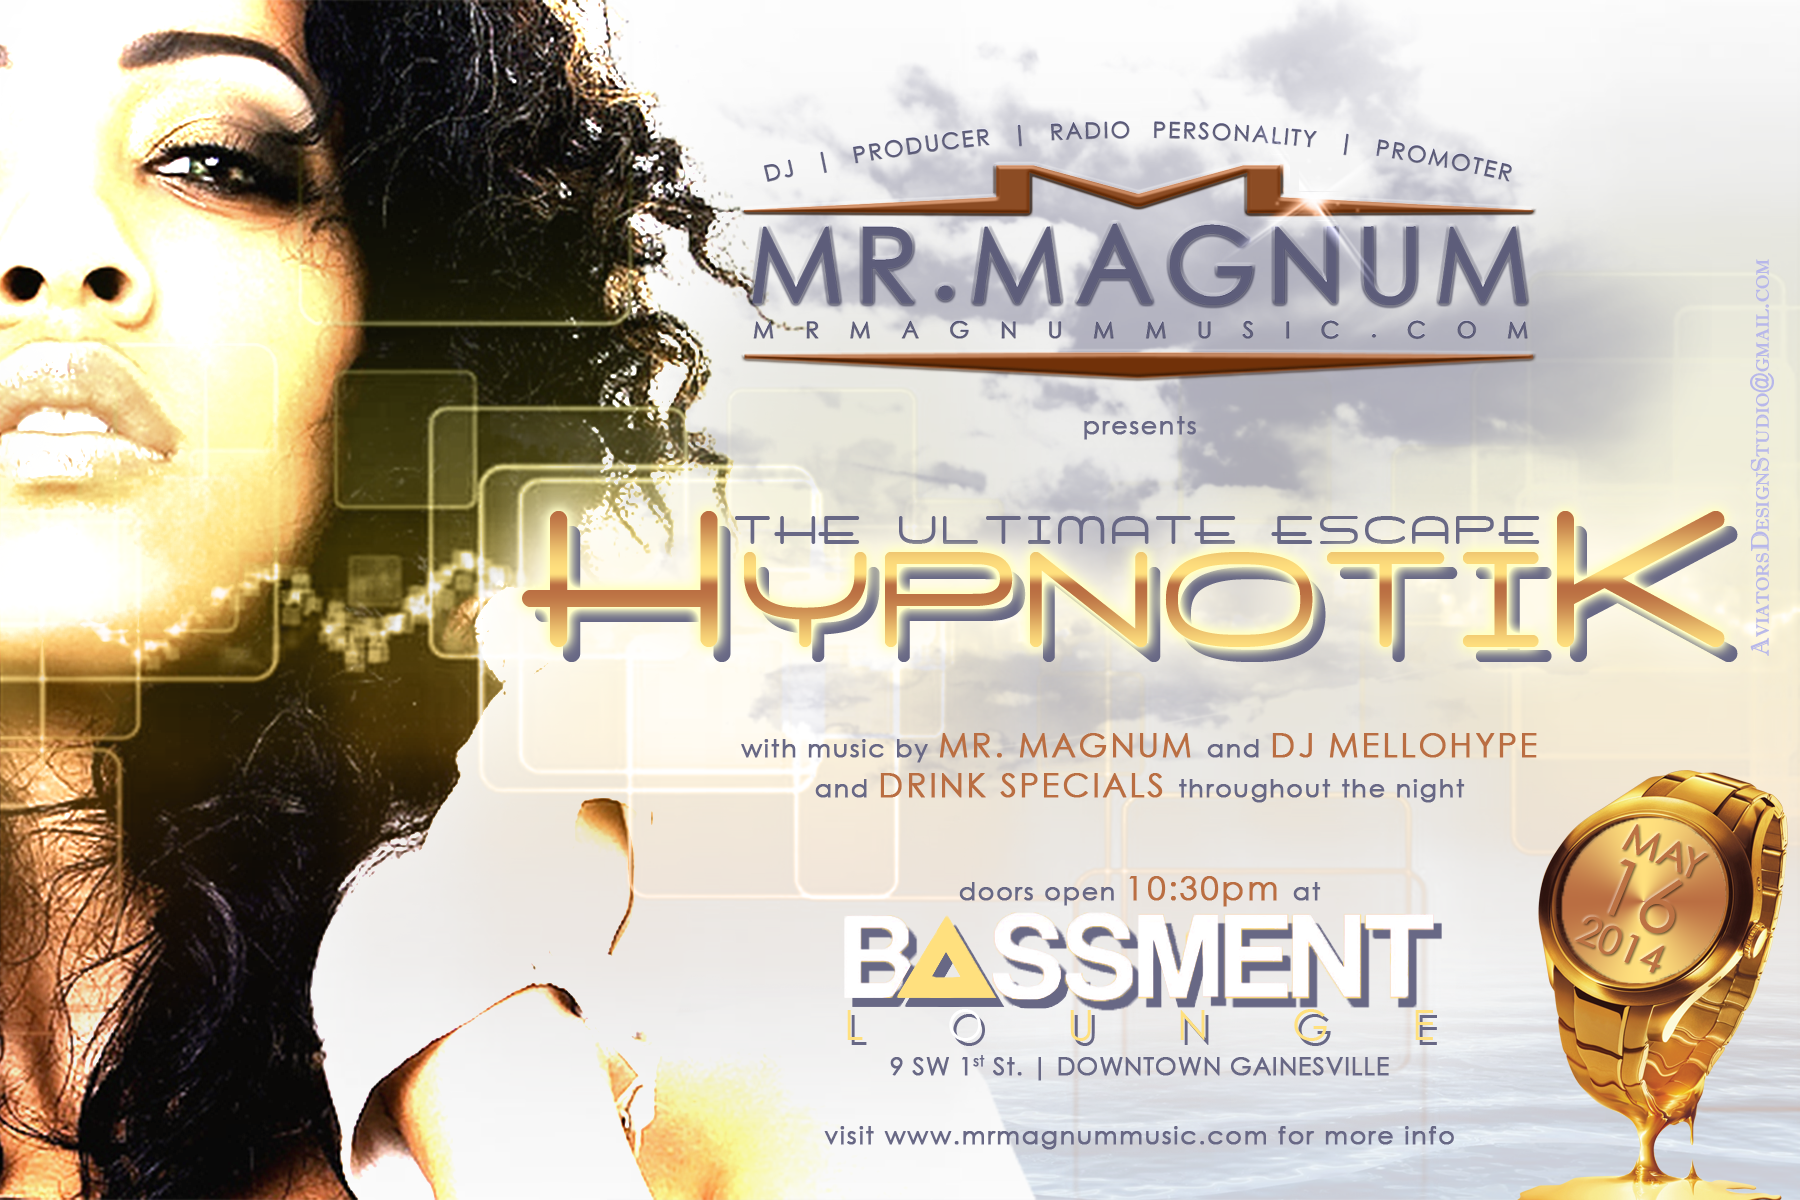 Hypnik - Your Monthly Caribbean Party Ritual featuring Mr. Magnum